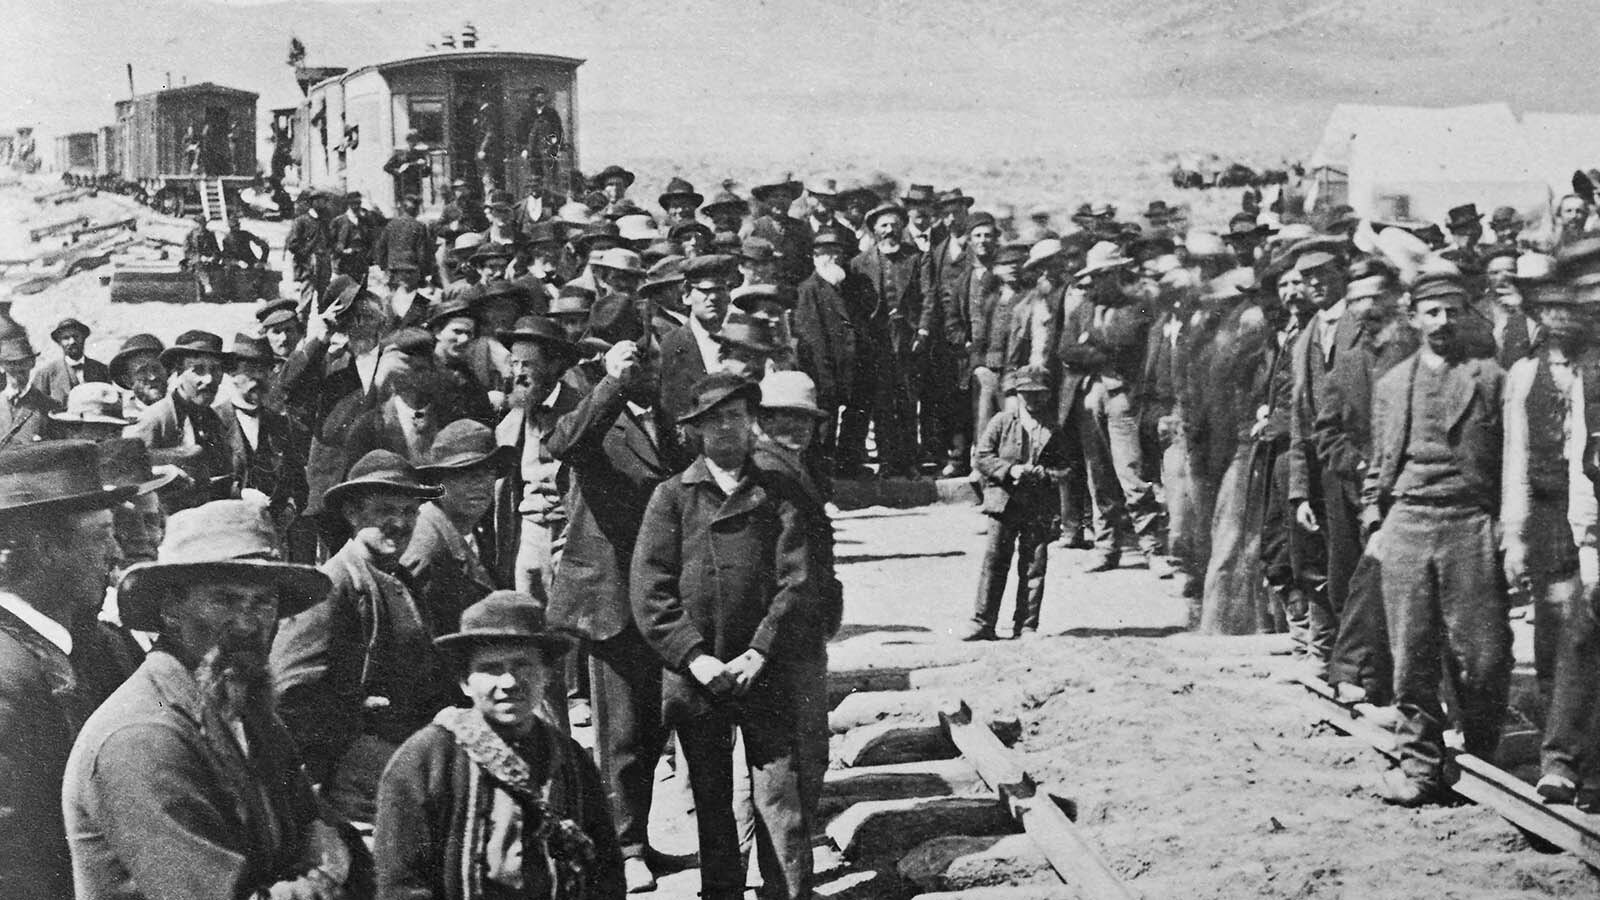 The Golden Spike ceremony on completion of the first transcontinental railroad, as trains of the Central Pacific and Union Pacific rail met at Promontory, Utah, on May 10 1869. The image is one half of a stereoscopic image.